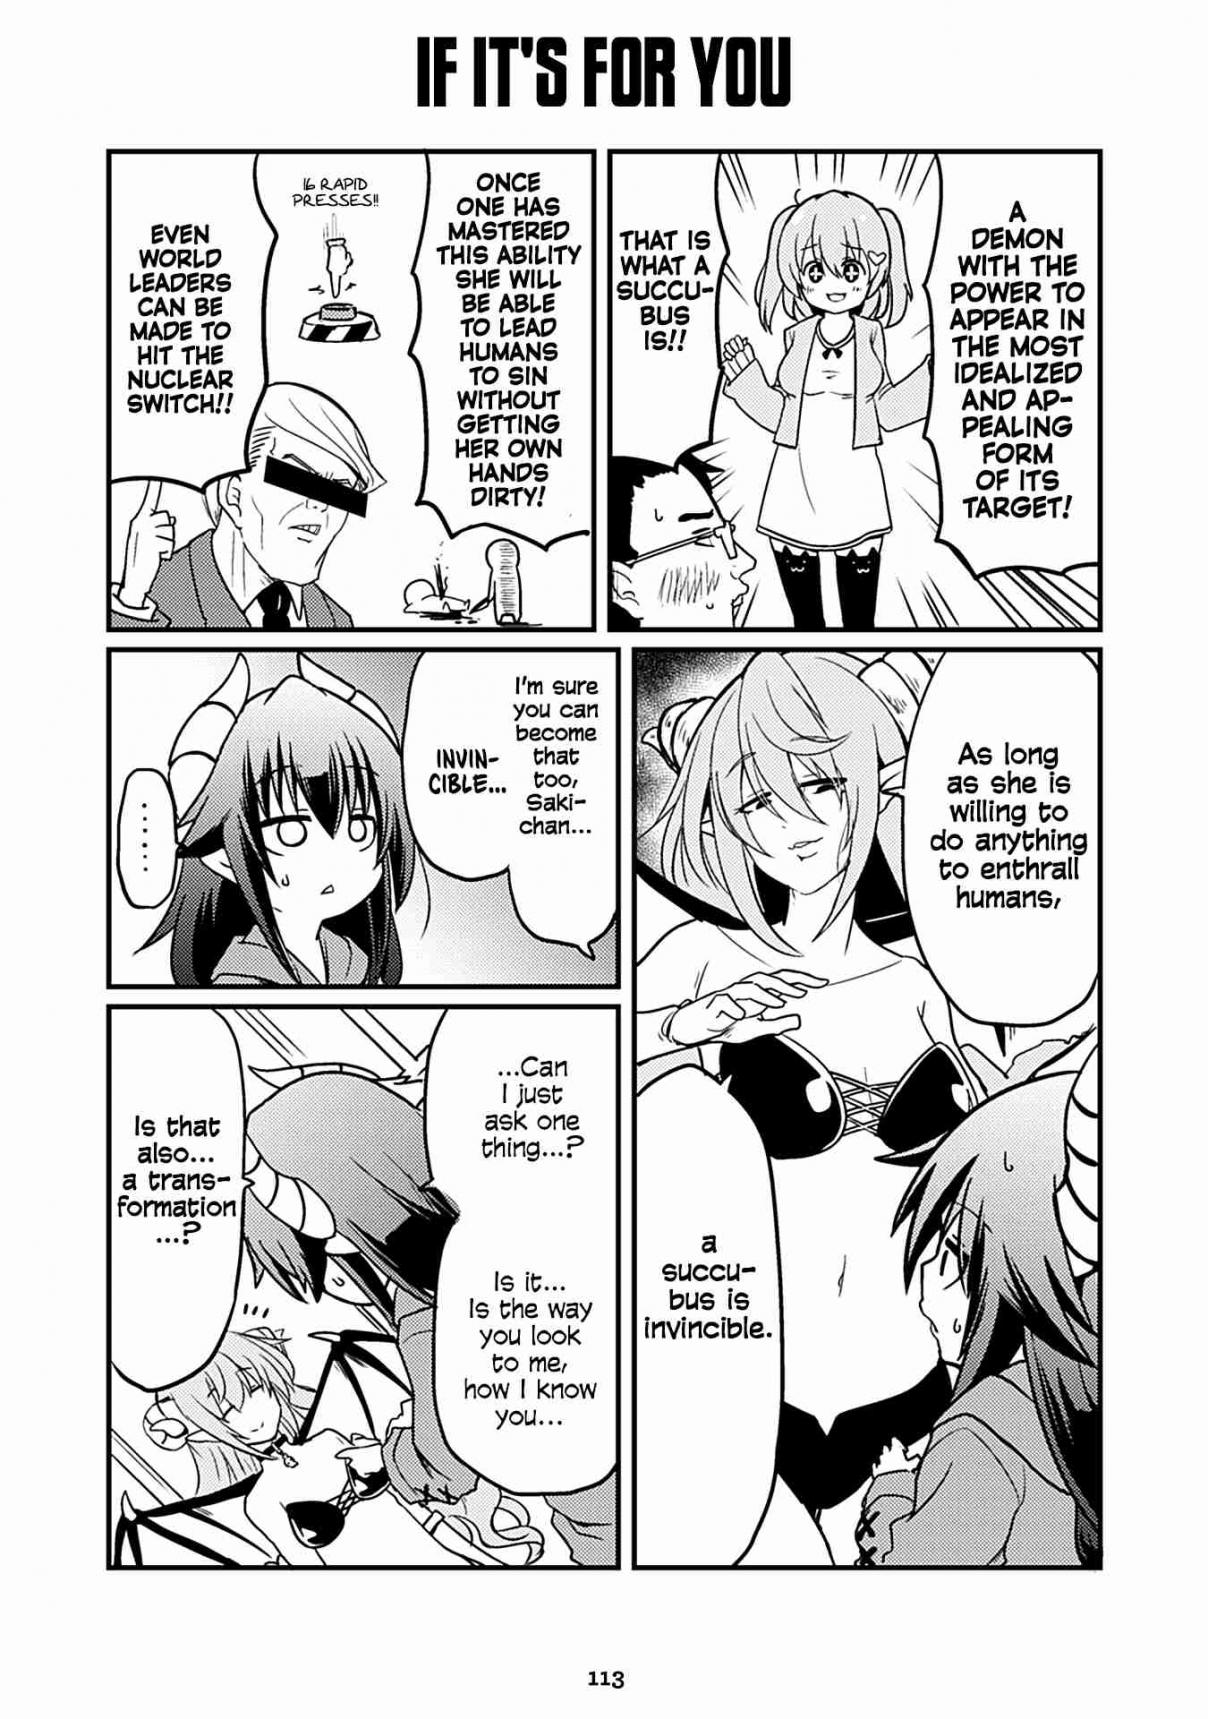 Naughty Succubus "Saki chan" Vol. 1 Ch. 97 If it's for you